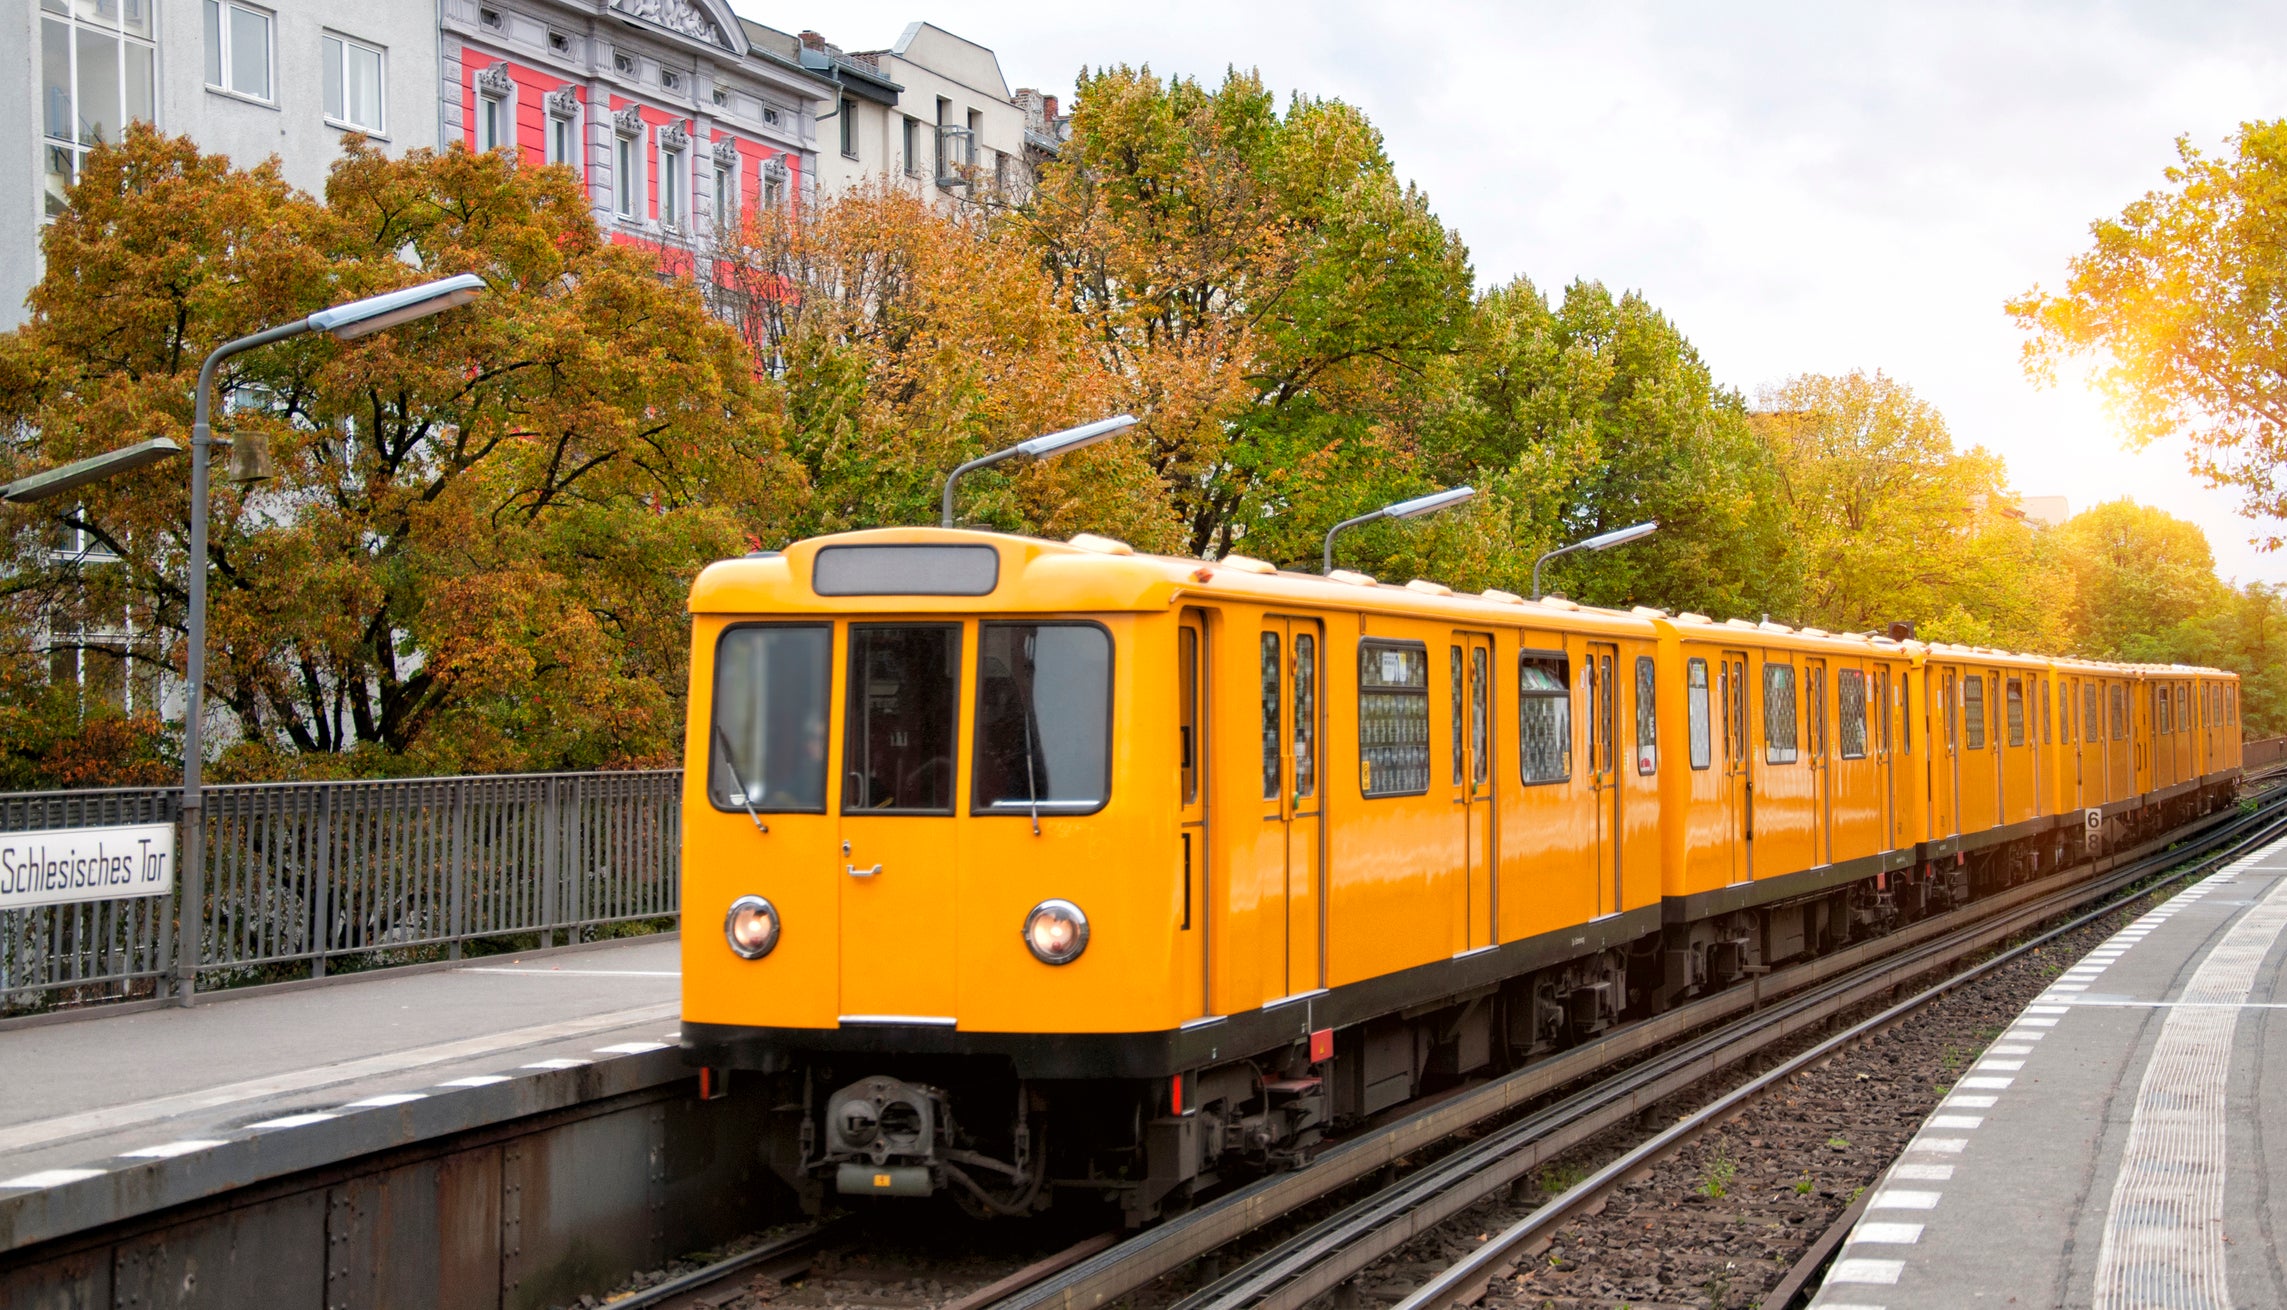 Berlin has made public transport in the city free for school children